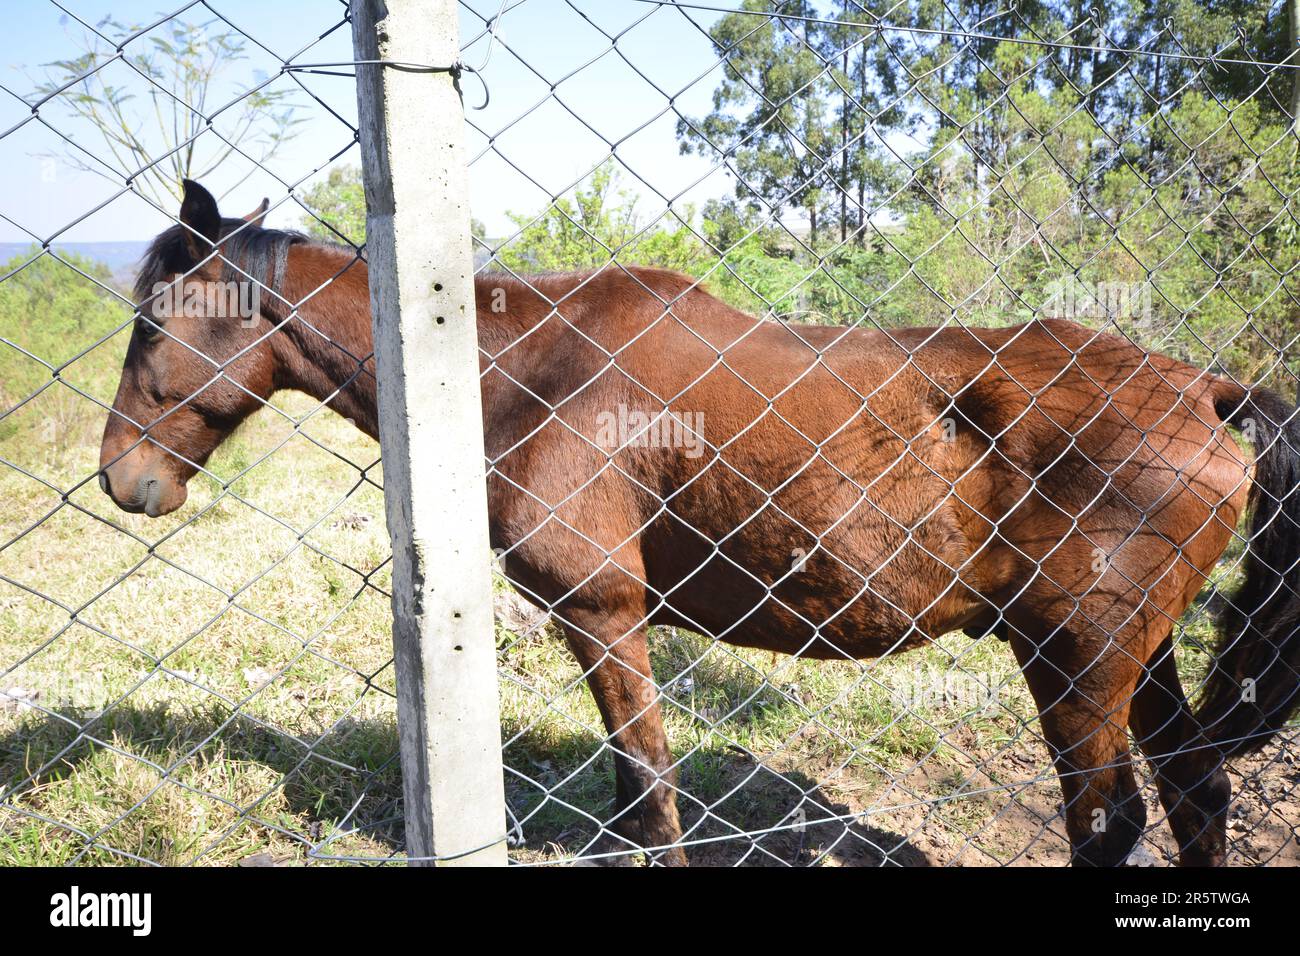 Horse or mare. Animal in pasture. Wire fence as protection. Concrete post. Brazil. South America. wide angle photo Stock Photo